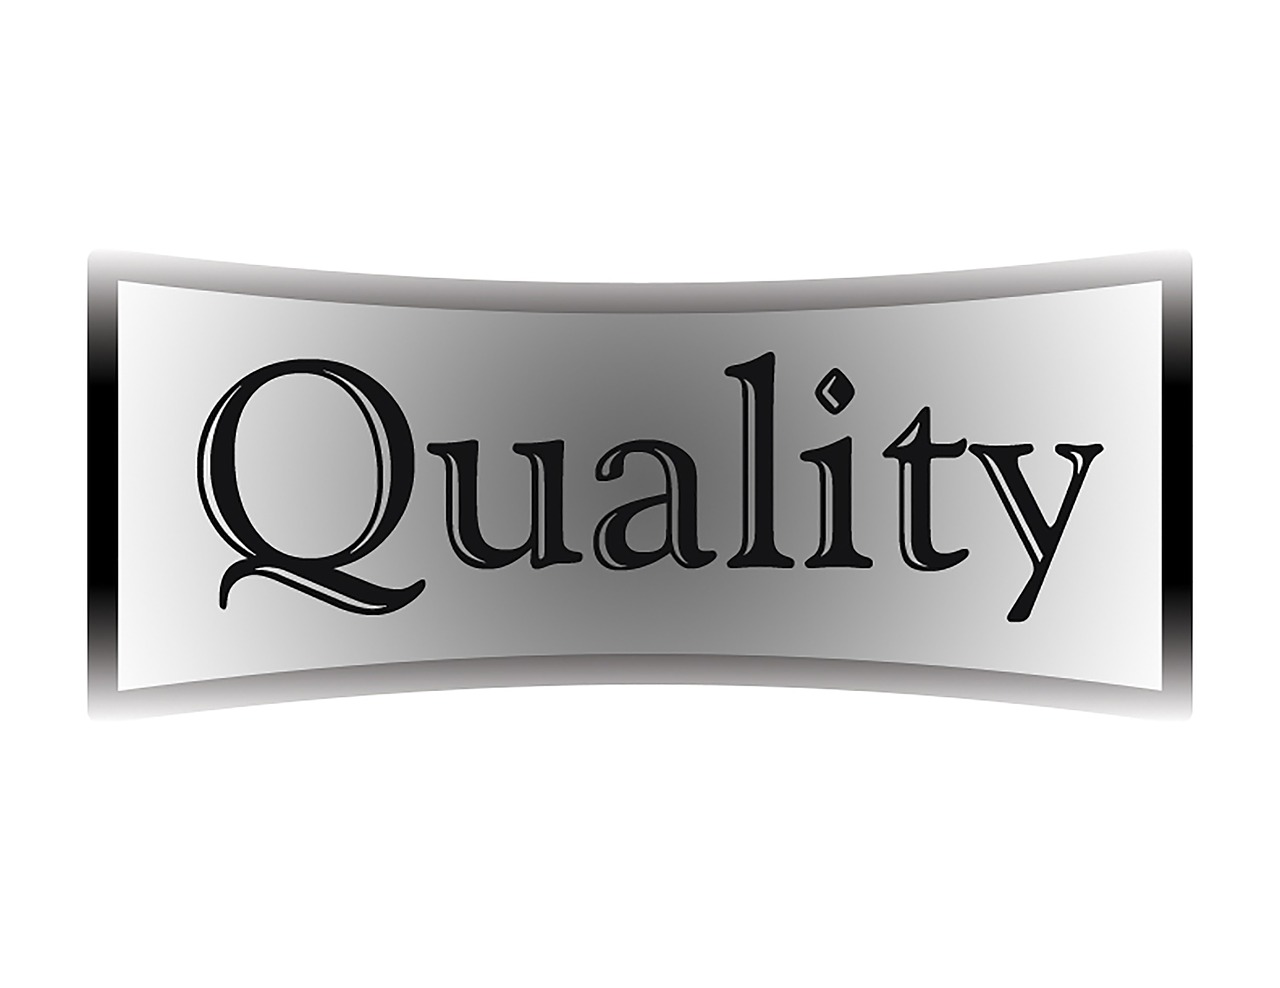 Compliance - Product Testing and Compliance: Ensuring Quality and Safety